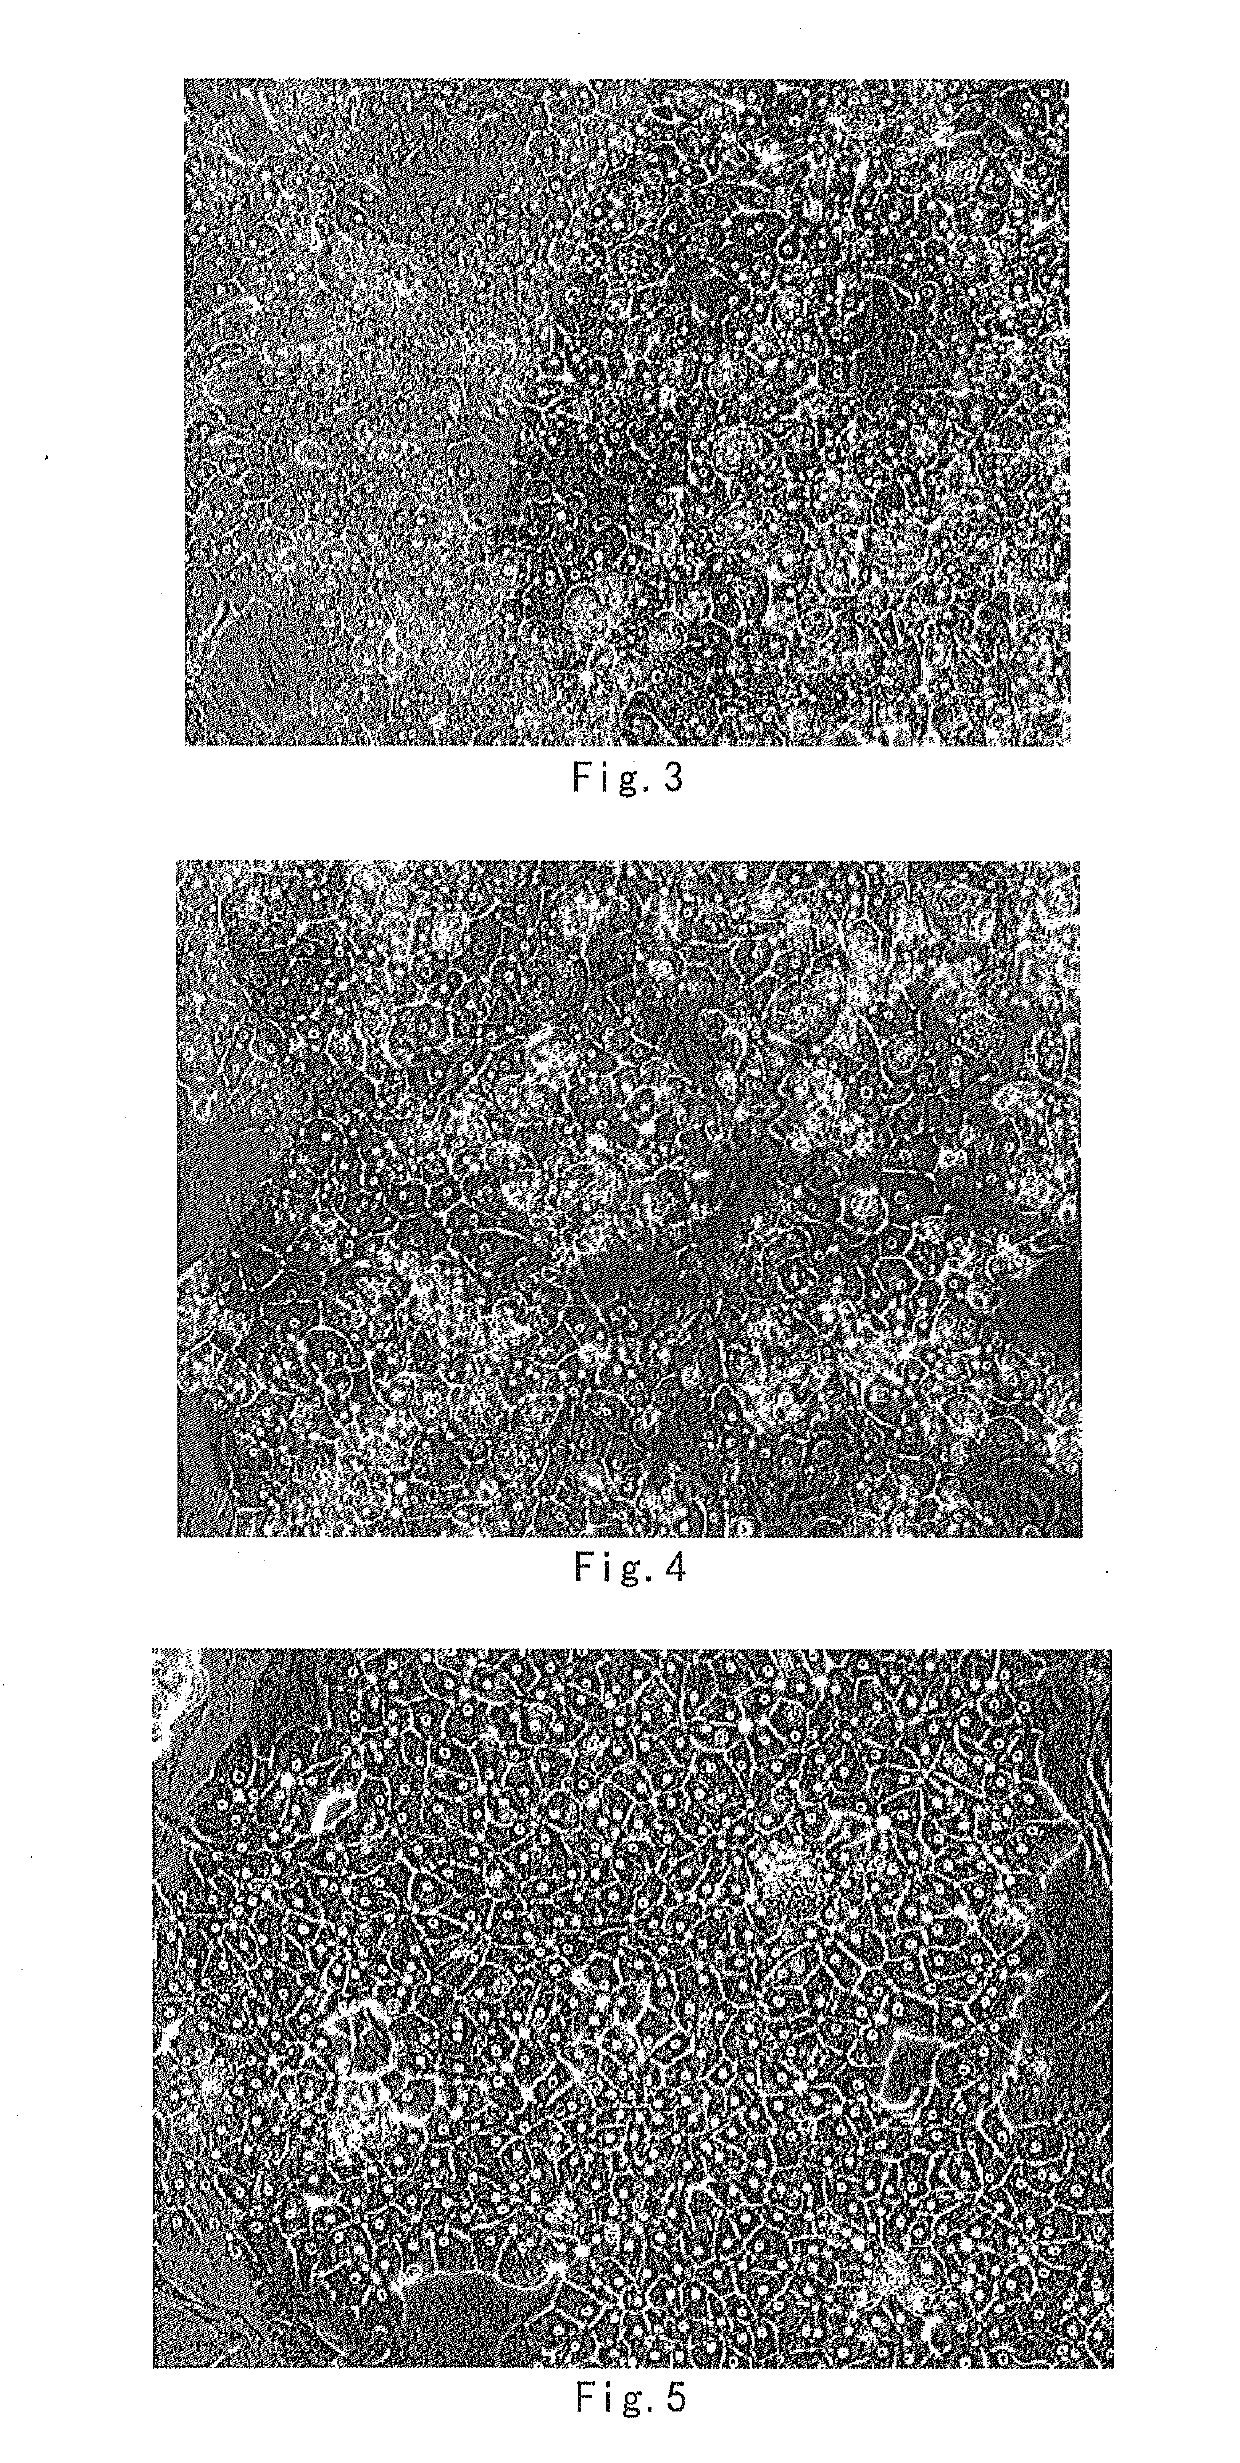 Culture method for long-term maintenance and proliferation subculture of human hepatocytes